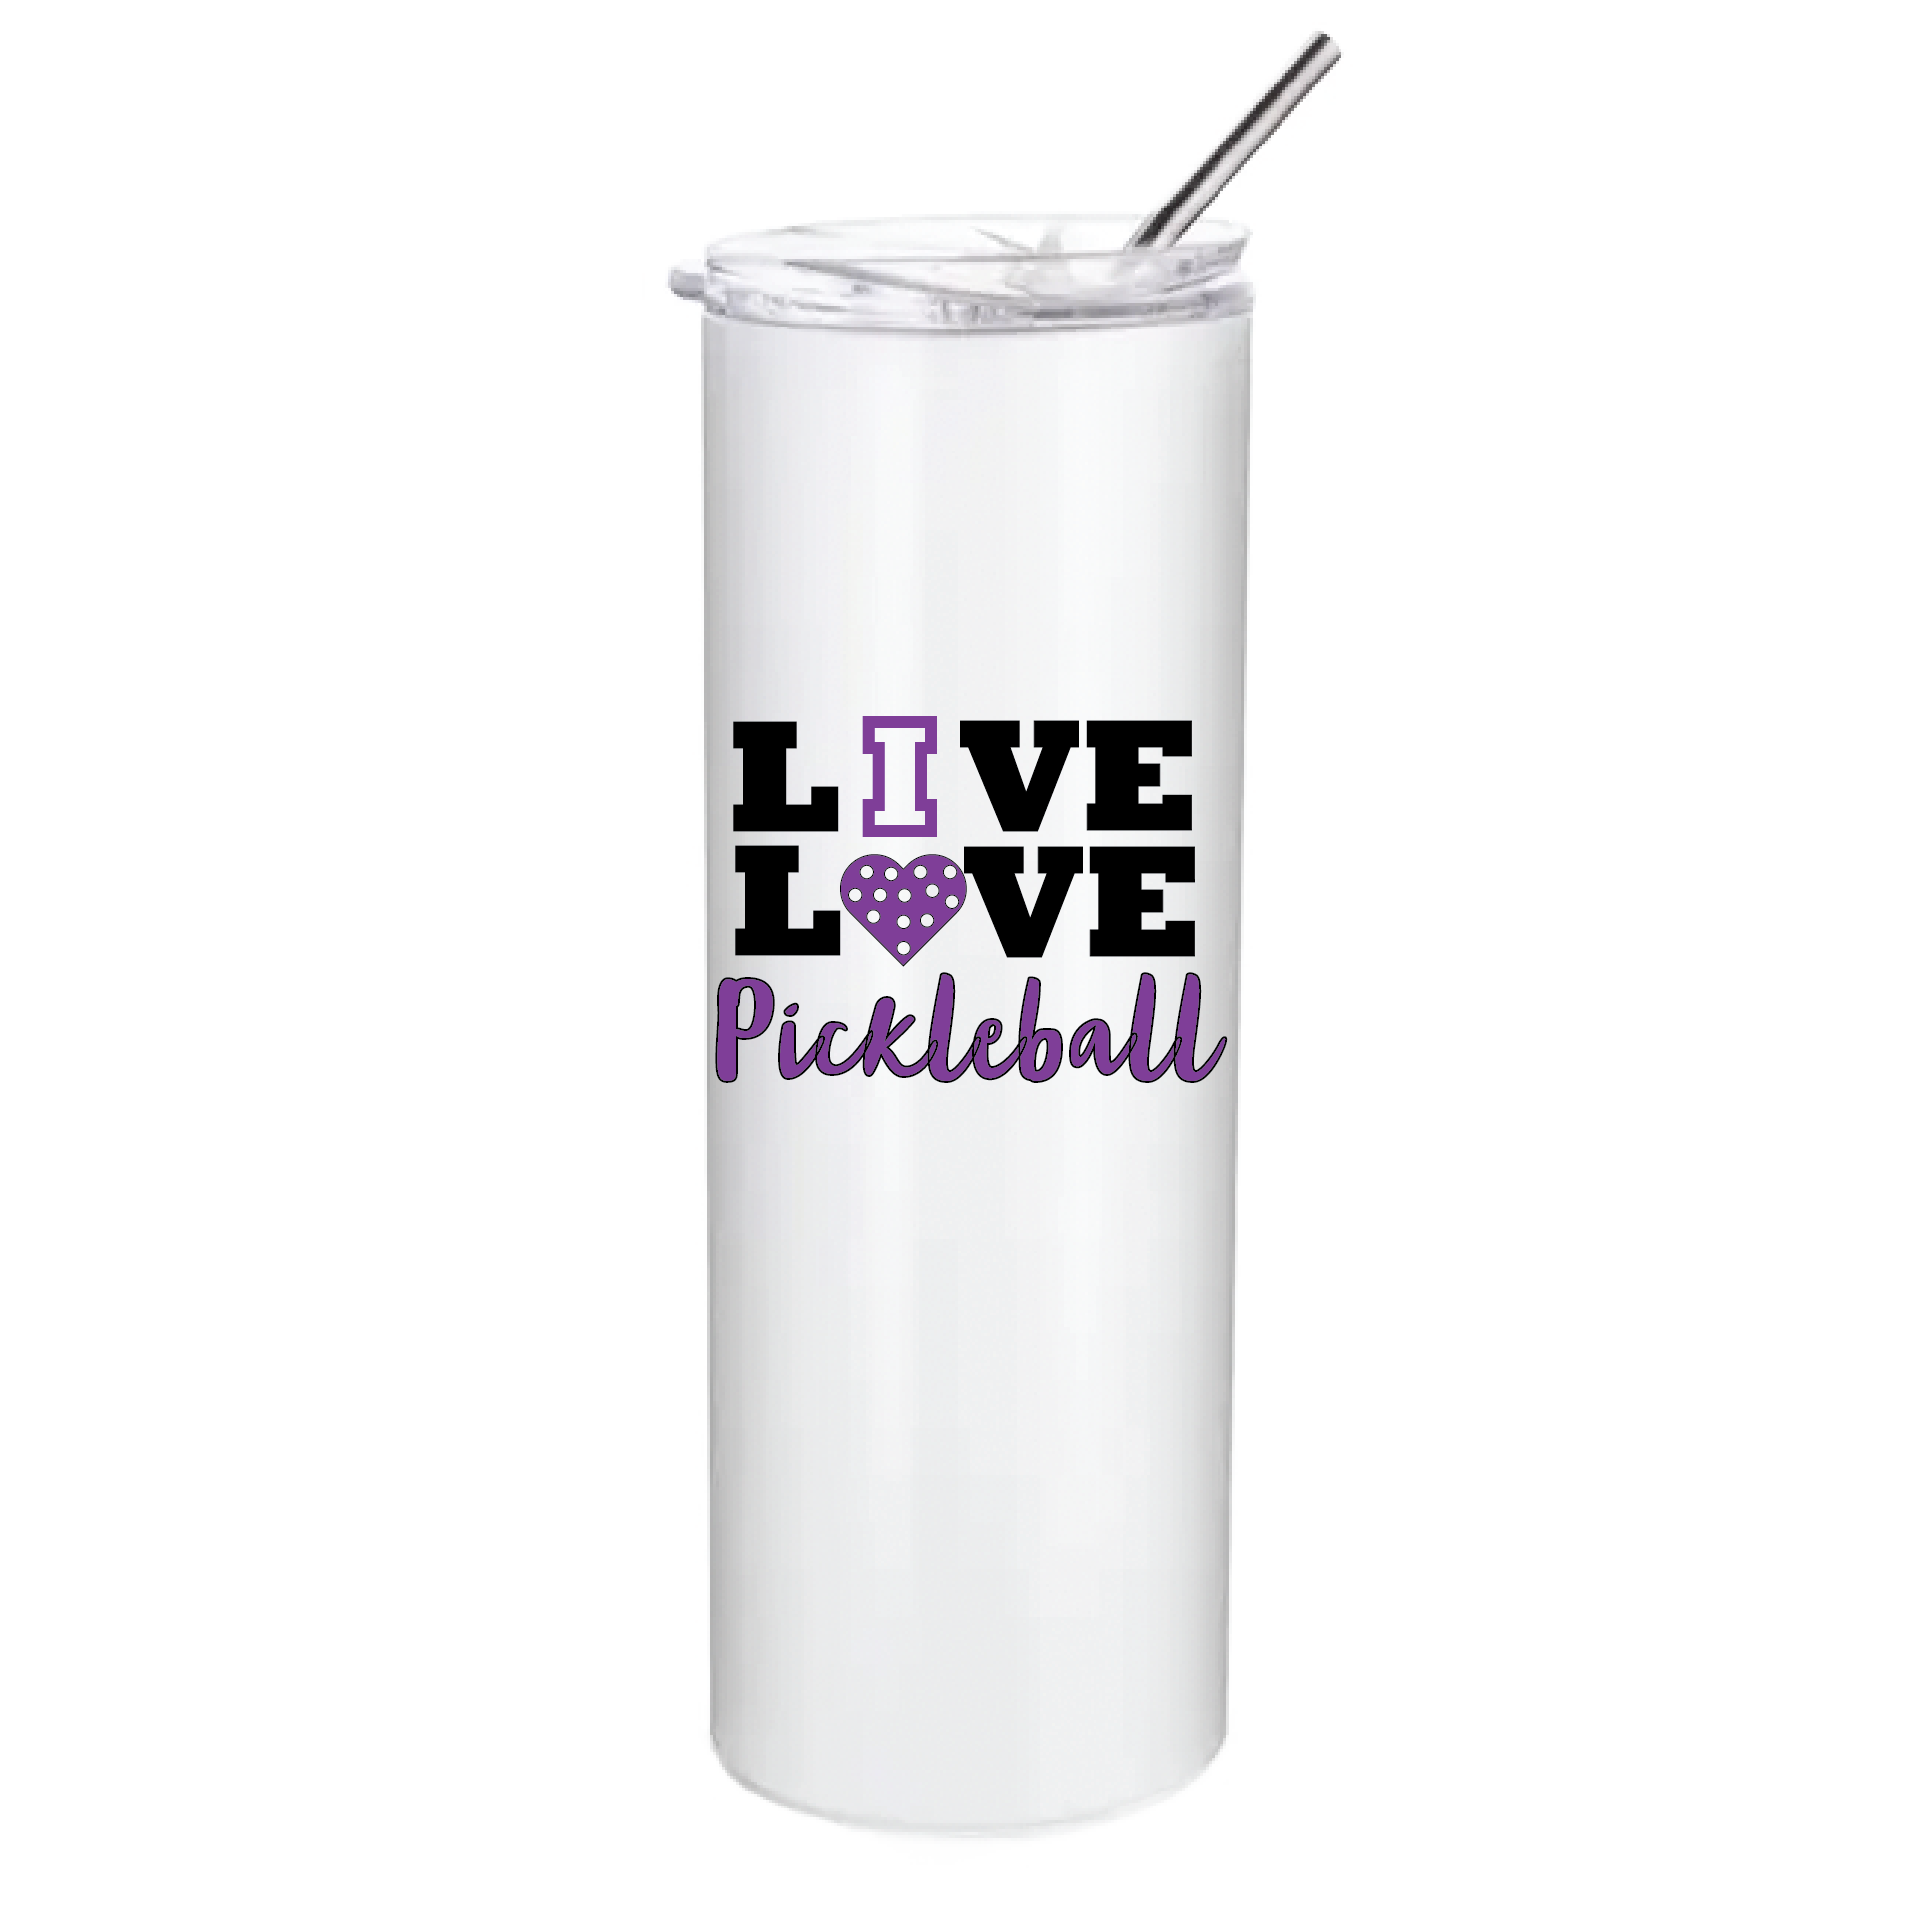 Pickleball Design: Live Love Pickleball  These stainless steel Tumblers help keep your drink cold for 24 hours while you are out on the court playing!! Also can help keep warm drinks warm for 8 hours. No BPA and a sweat-free coating. These are also PP food grade drink containers. Comes with a splash proof lid with a seal ring which makes it beautiful and durable. One-piece molding makes it crack free for long time durability.